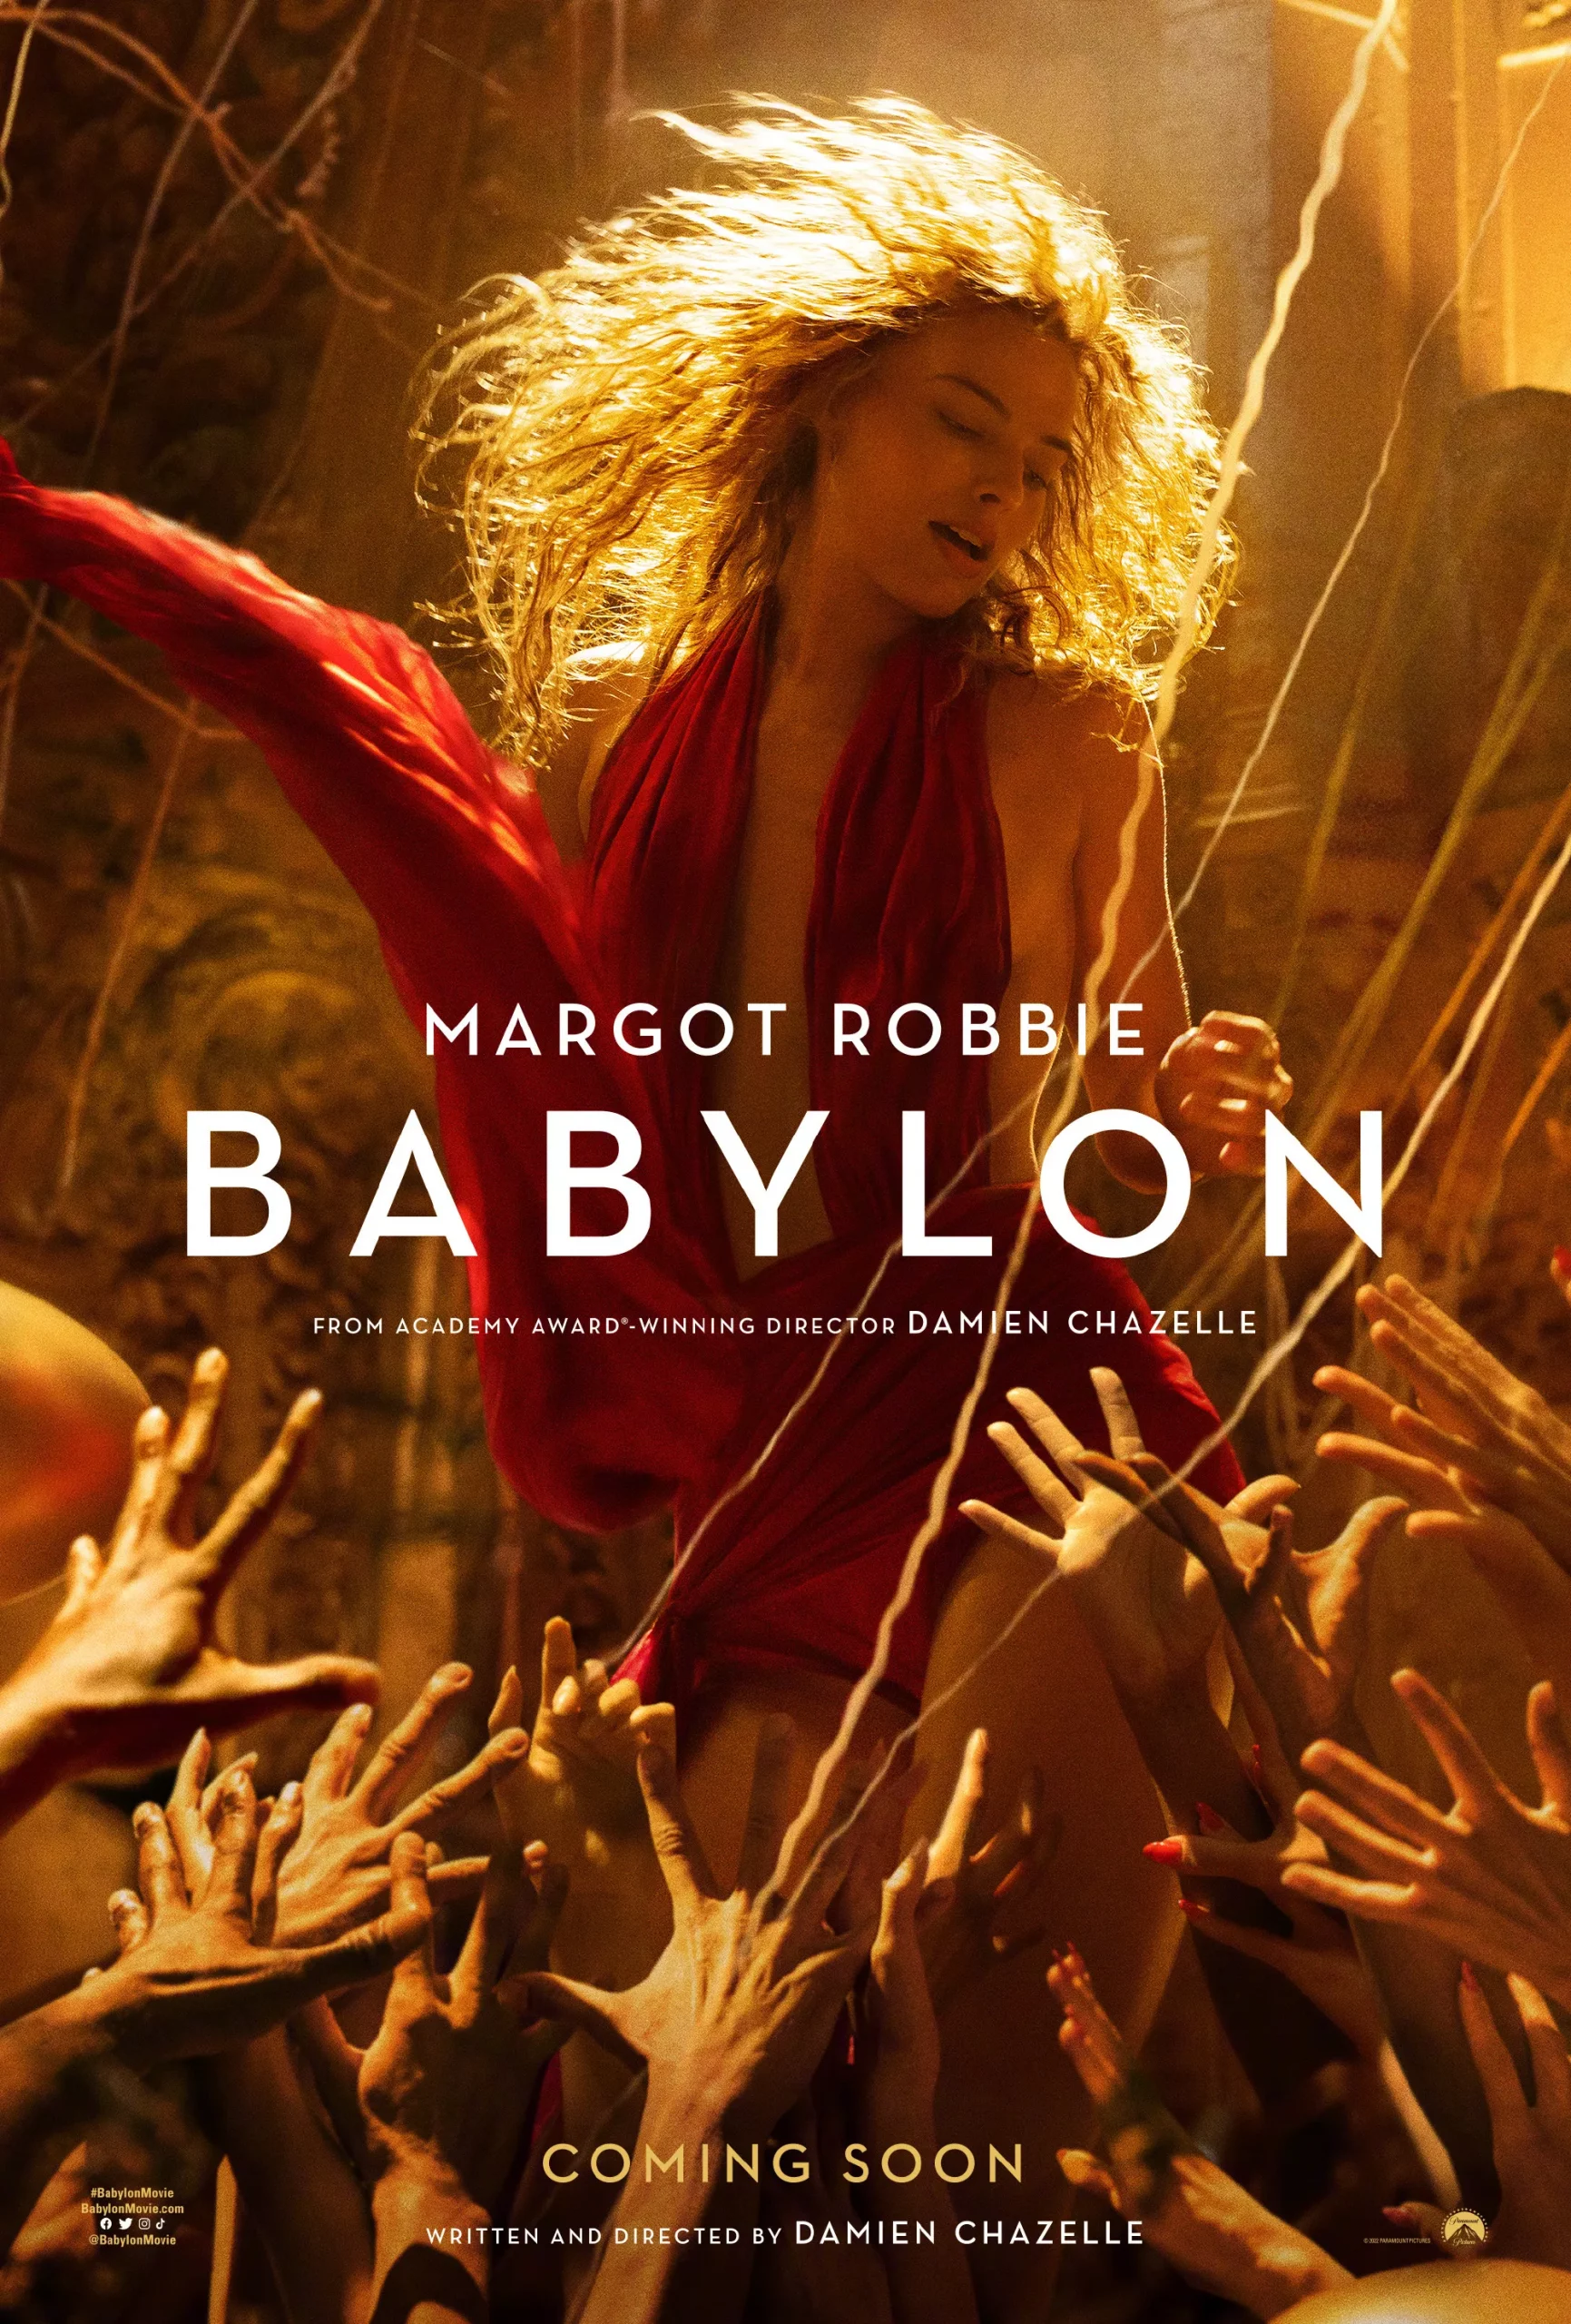 damien-chazelles-new-film-babylon-releases-character-posters-2